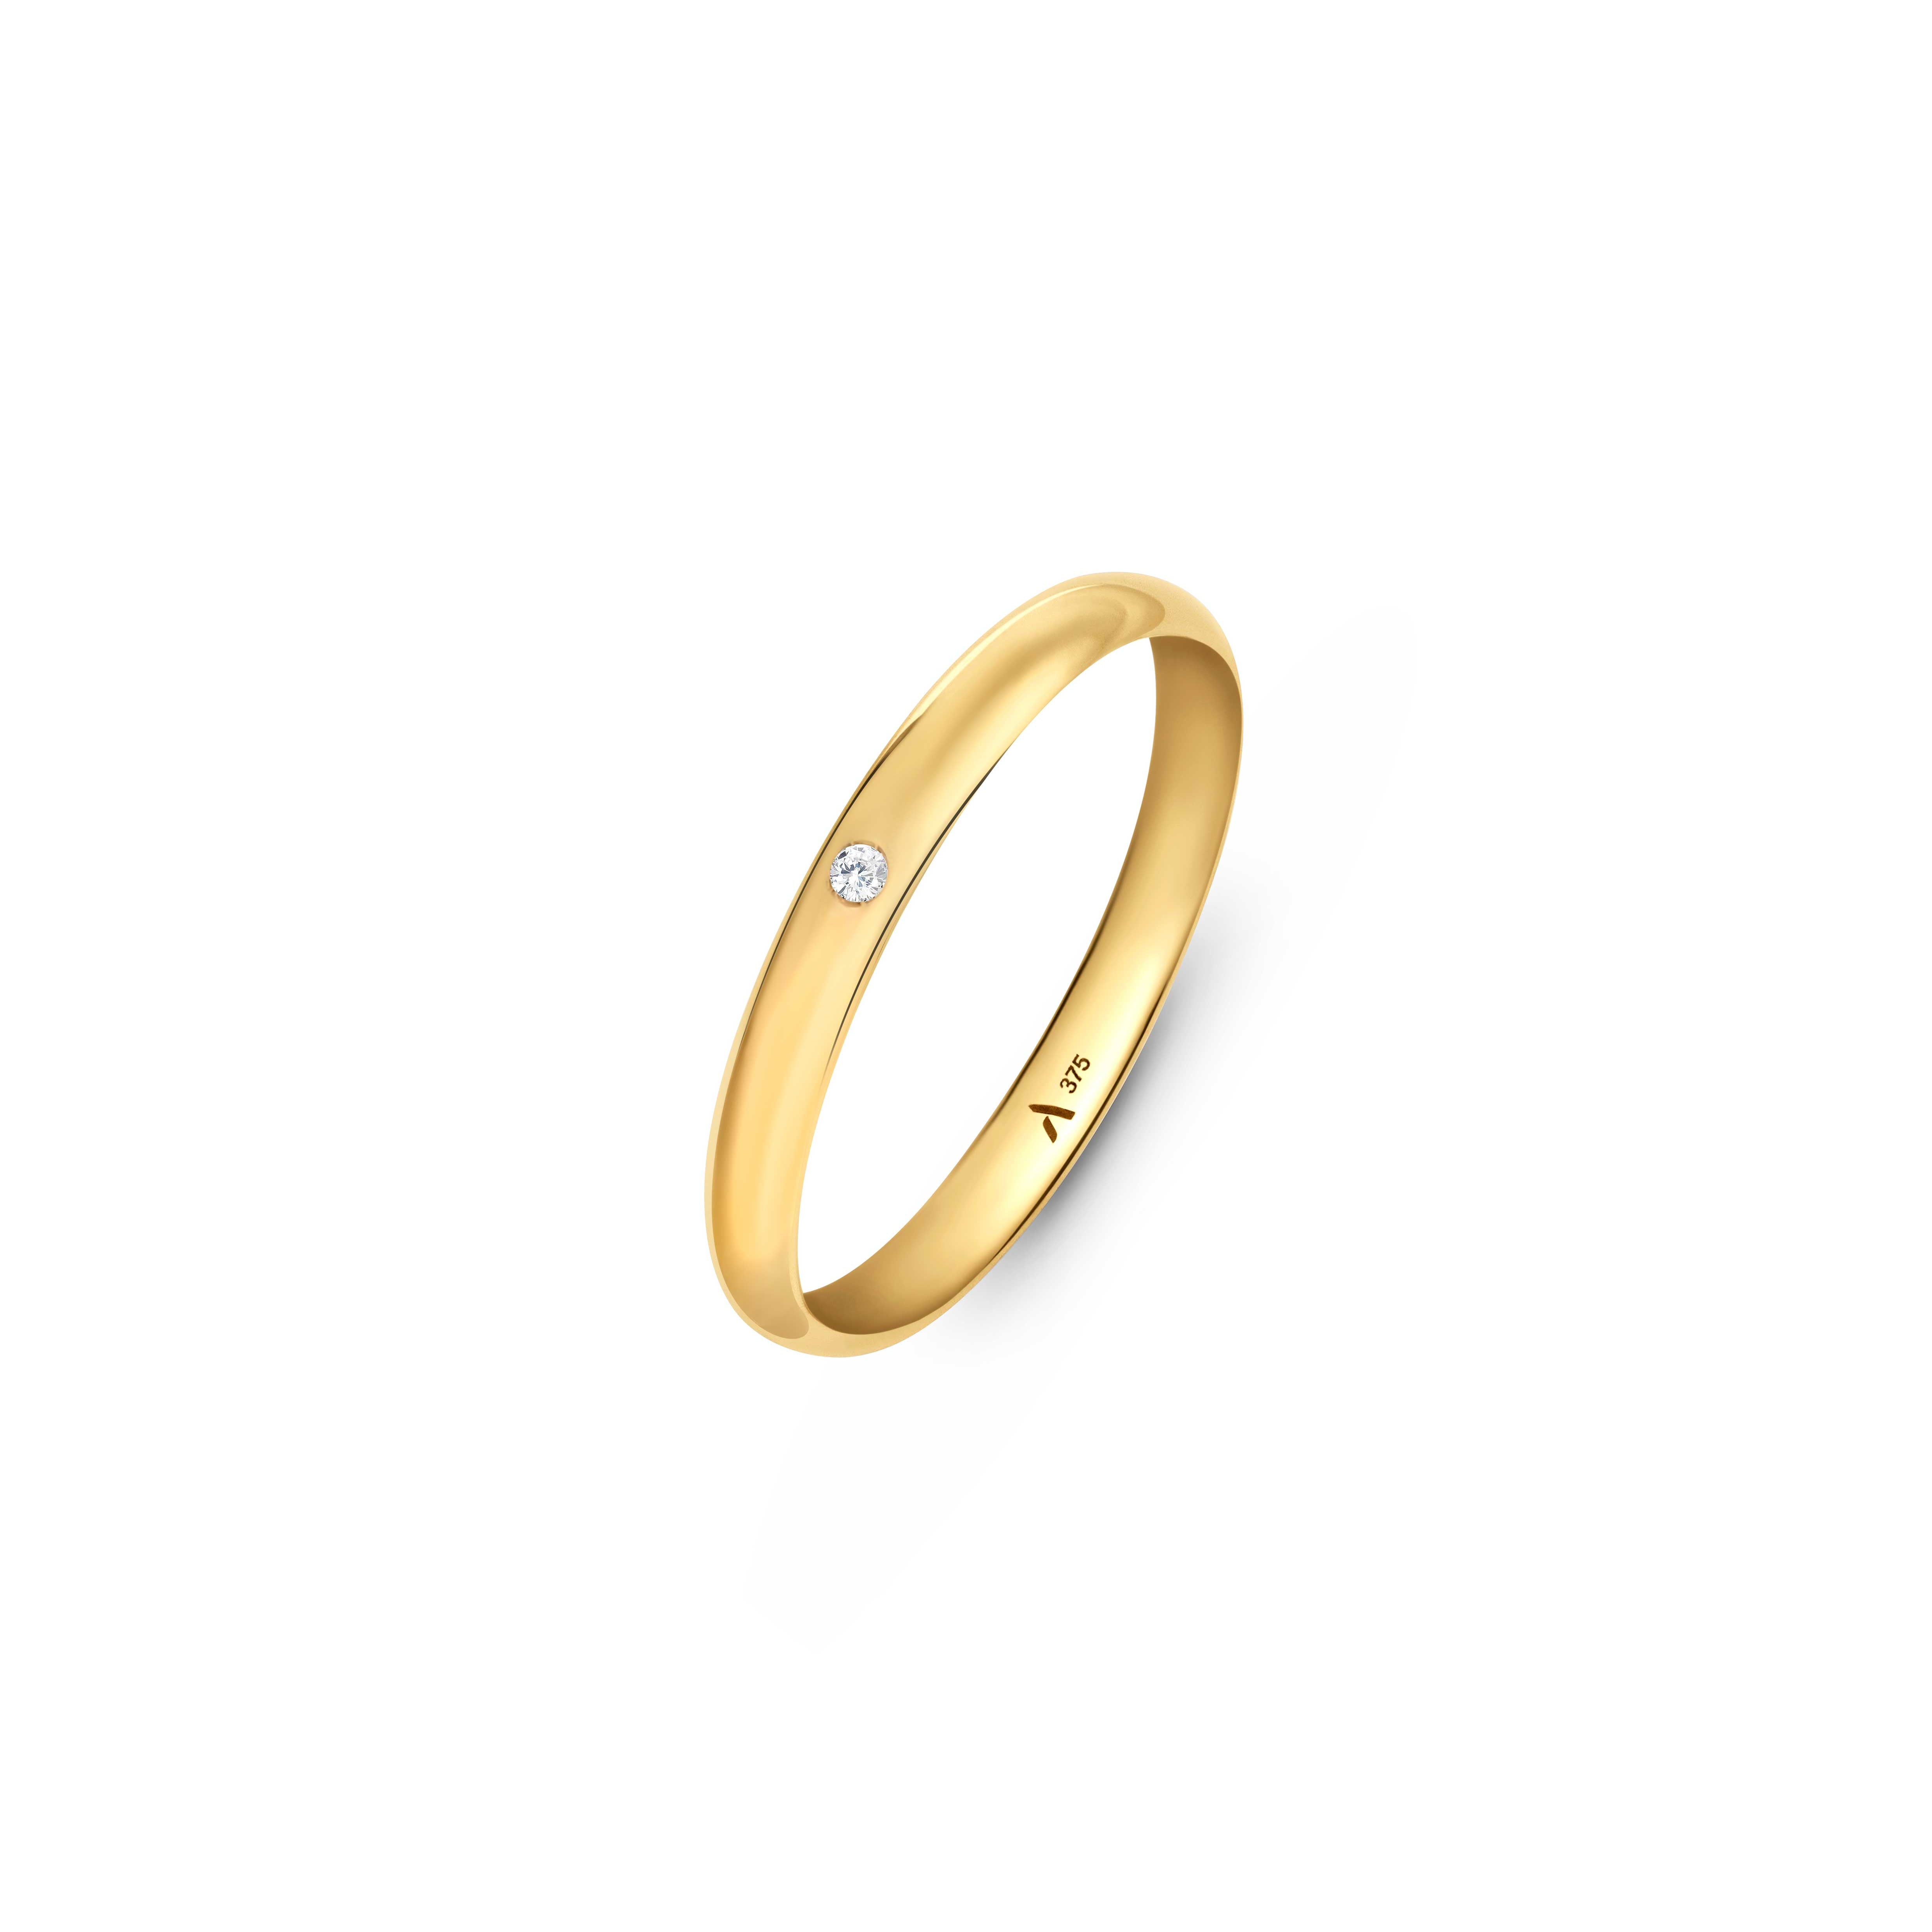 A 9ct gold wedding band with 1.3 mm cubic zirconia stone placed on a clean white background